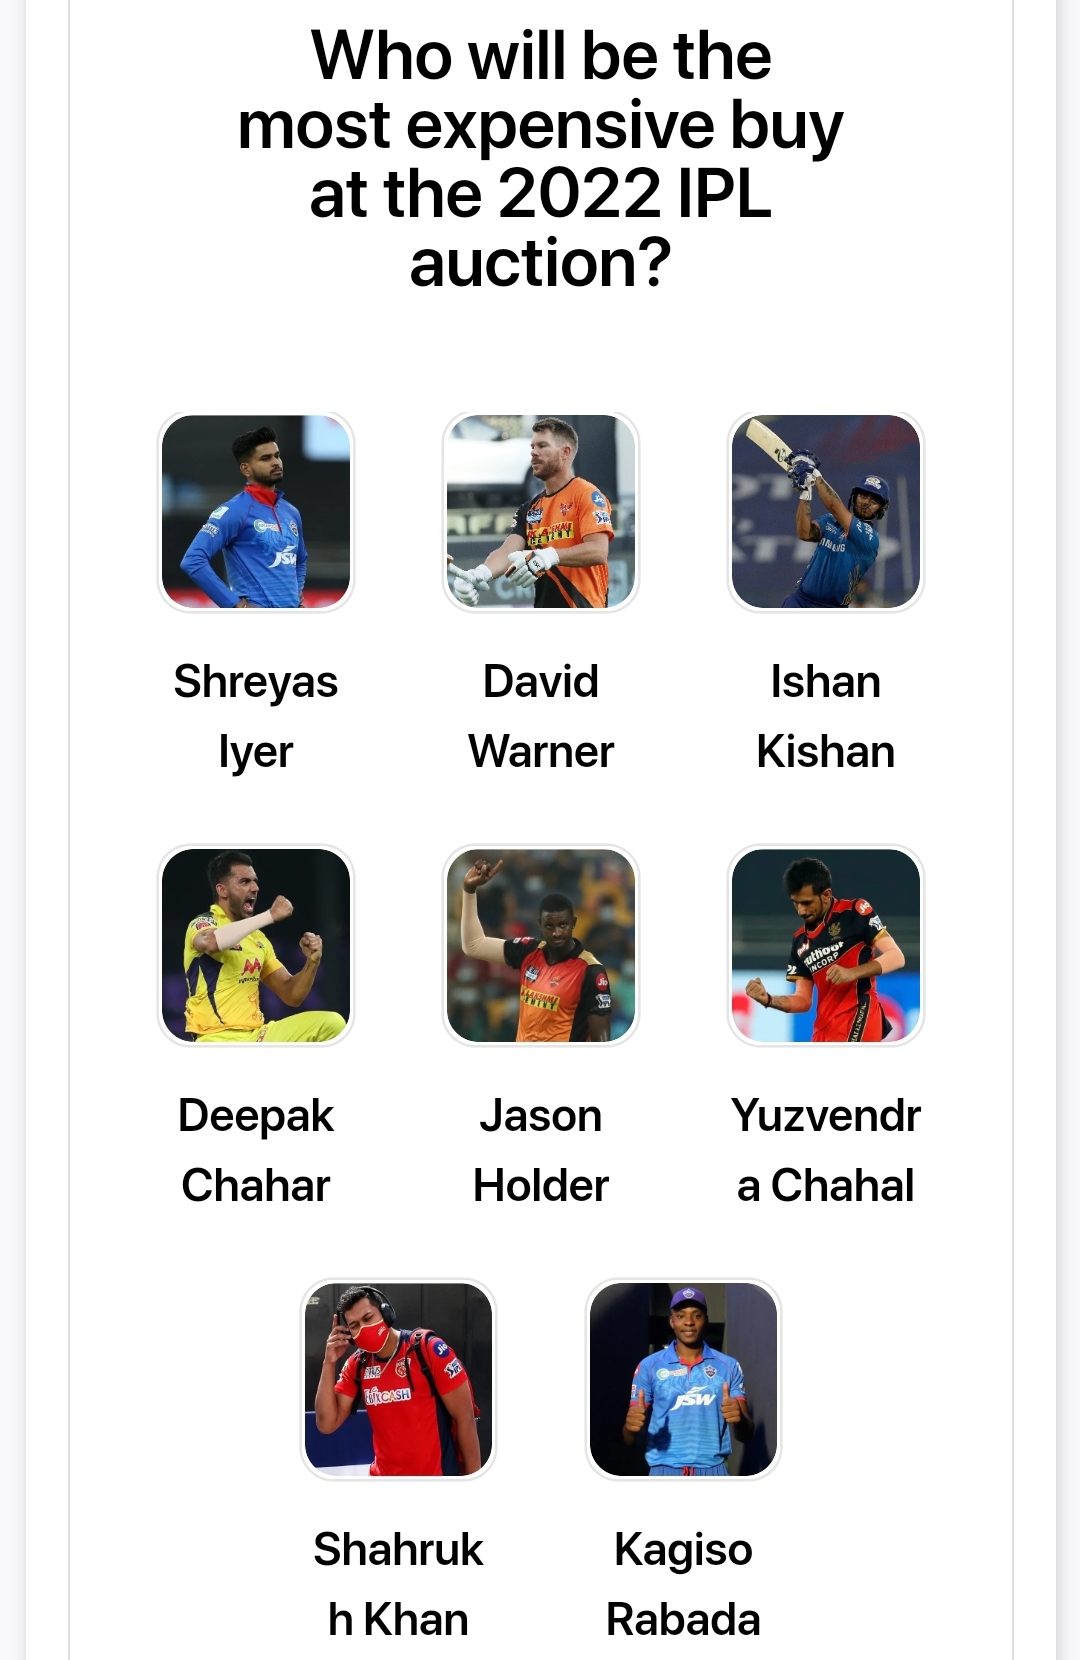 Who will be the most expensive player in the IPL 2022 auction? NewsWire